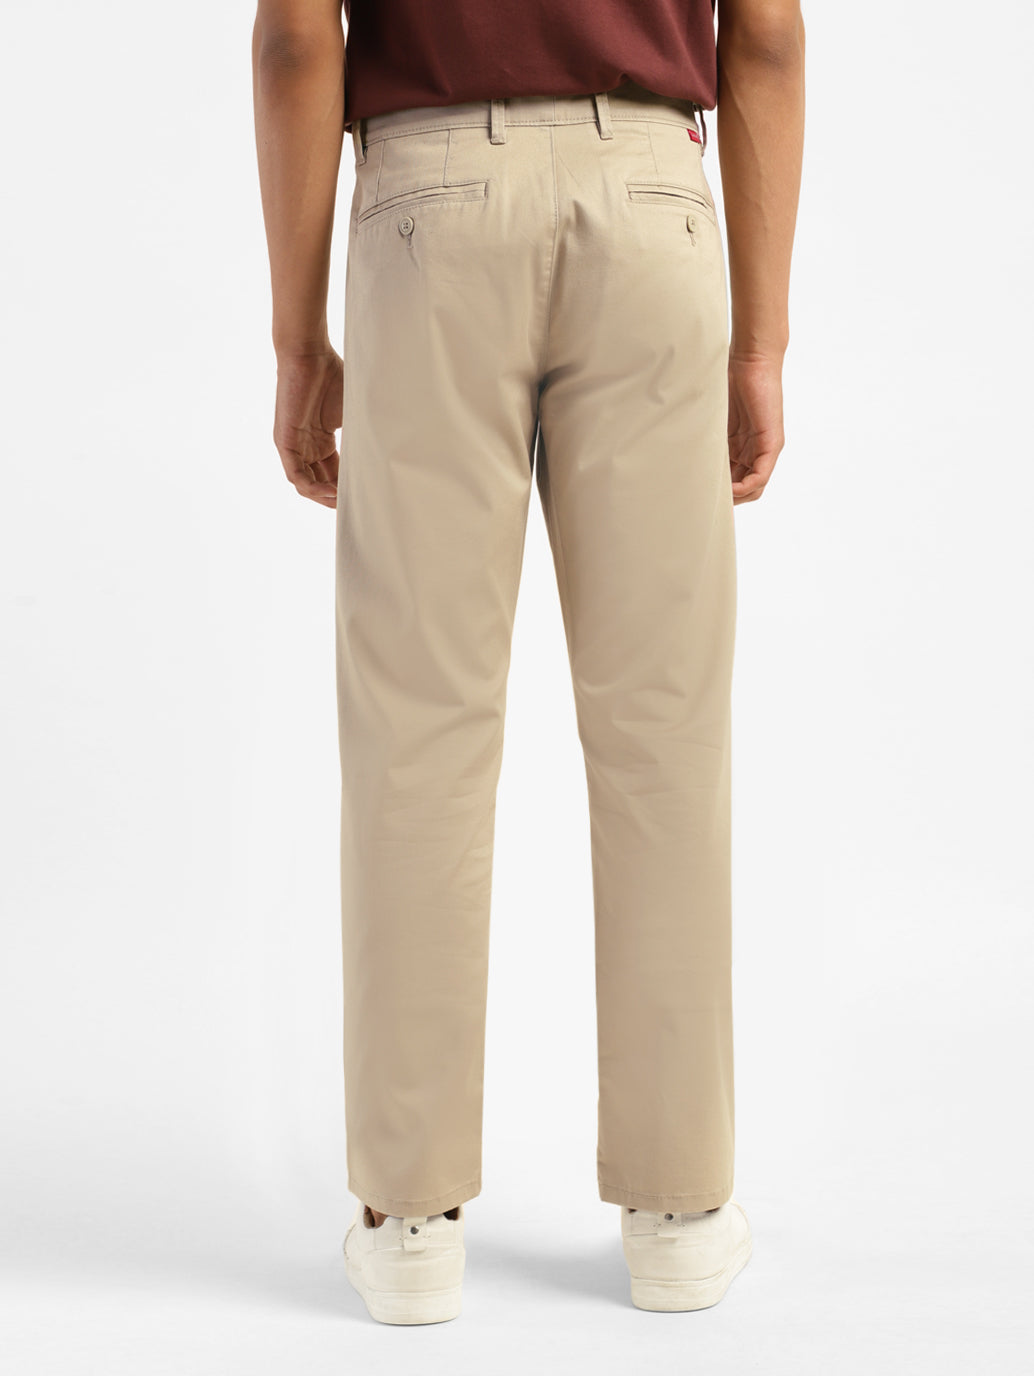 Men\'s Khaki Straight Fit Chinos – Levis India Store